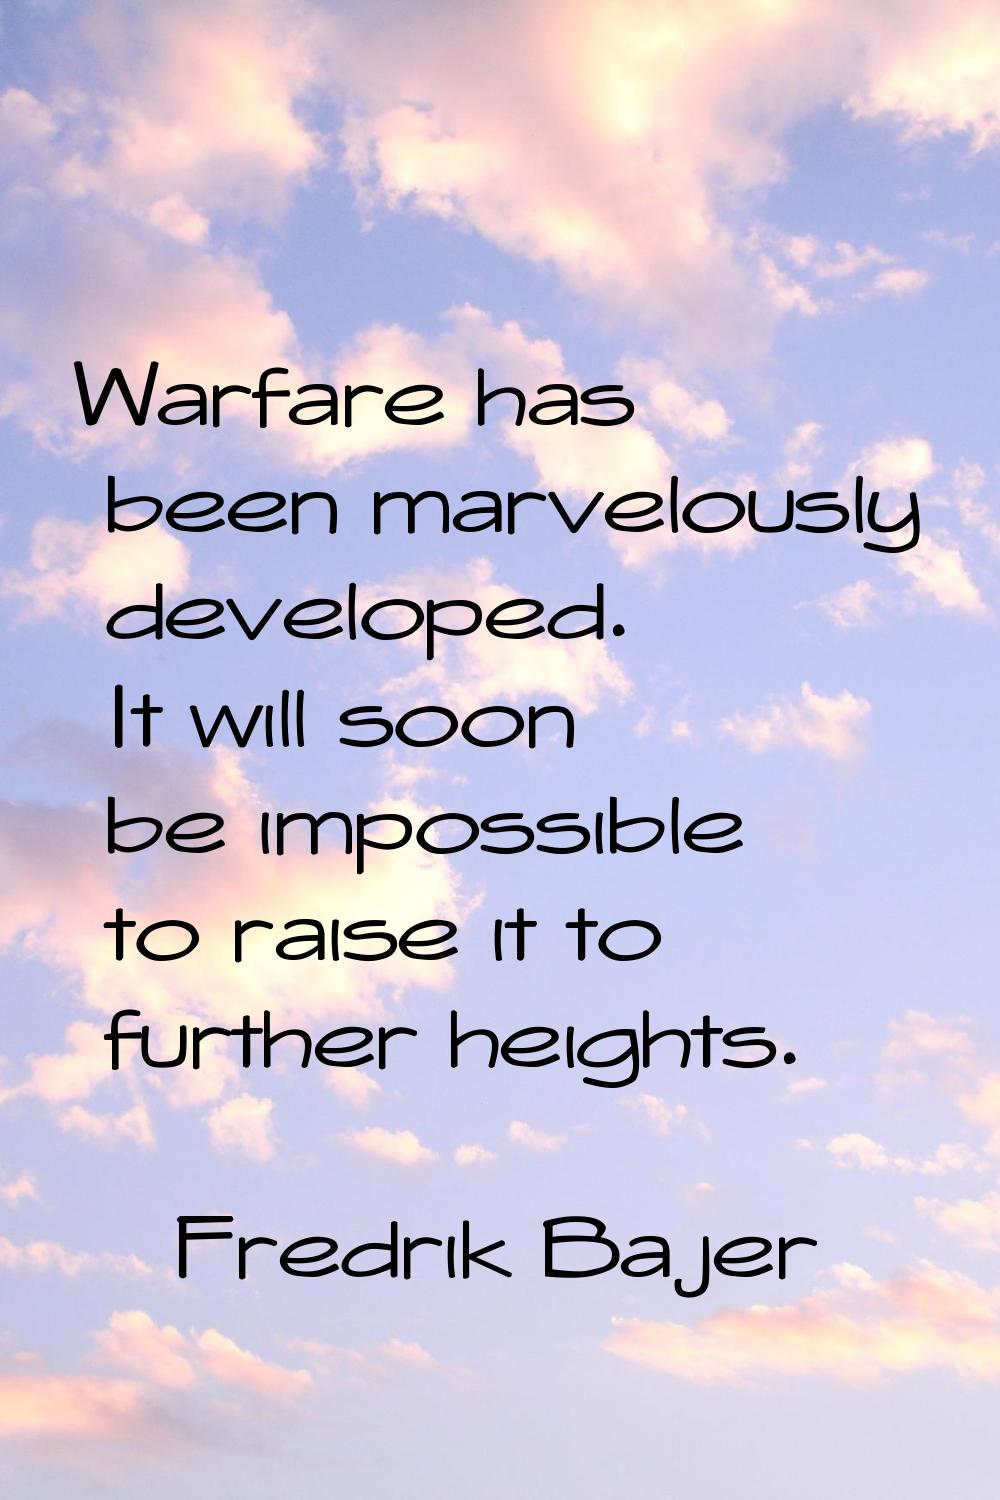 Warfare has been marvelously developed. It will soon be impossible to raise it to further heights.